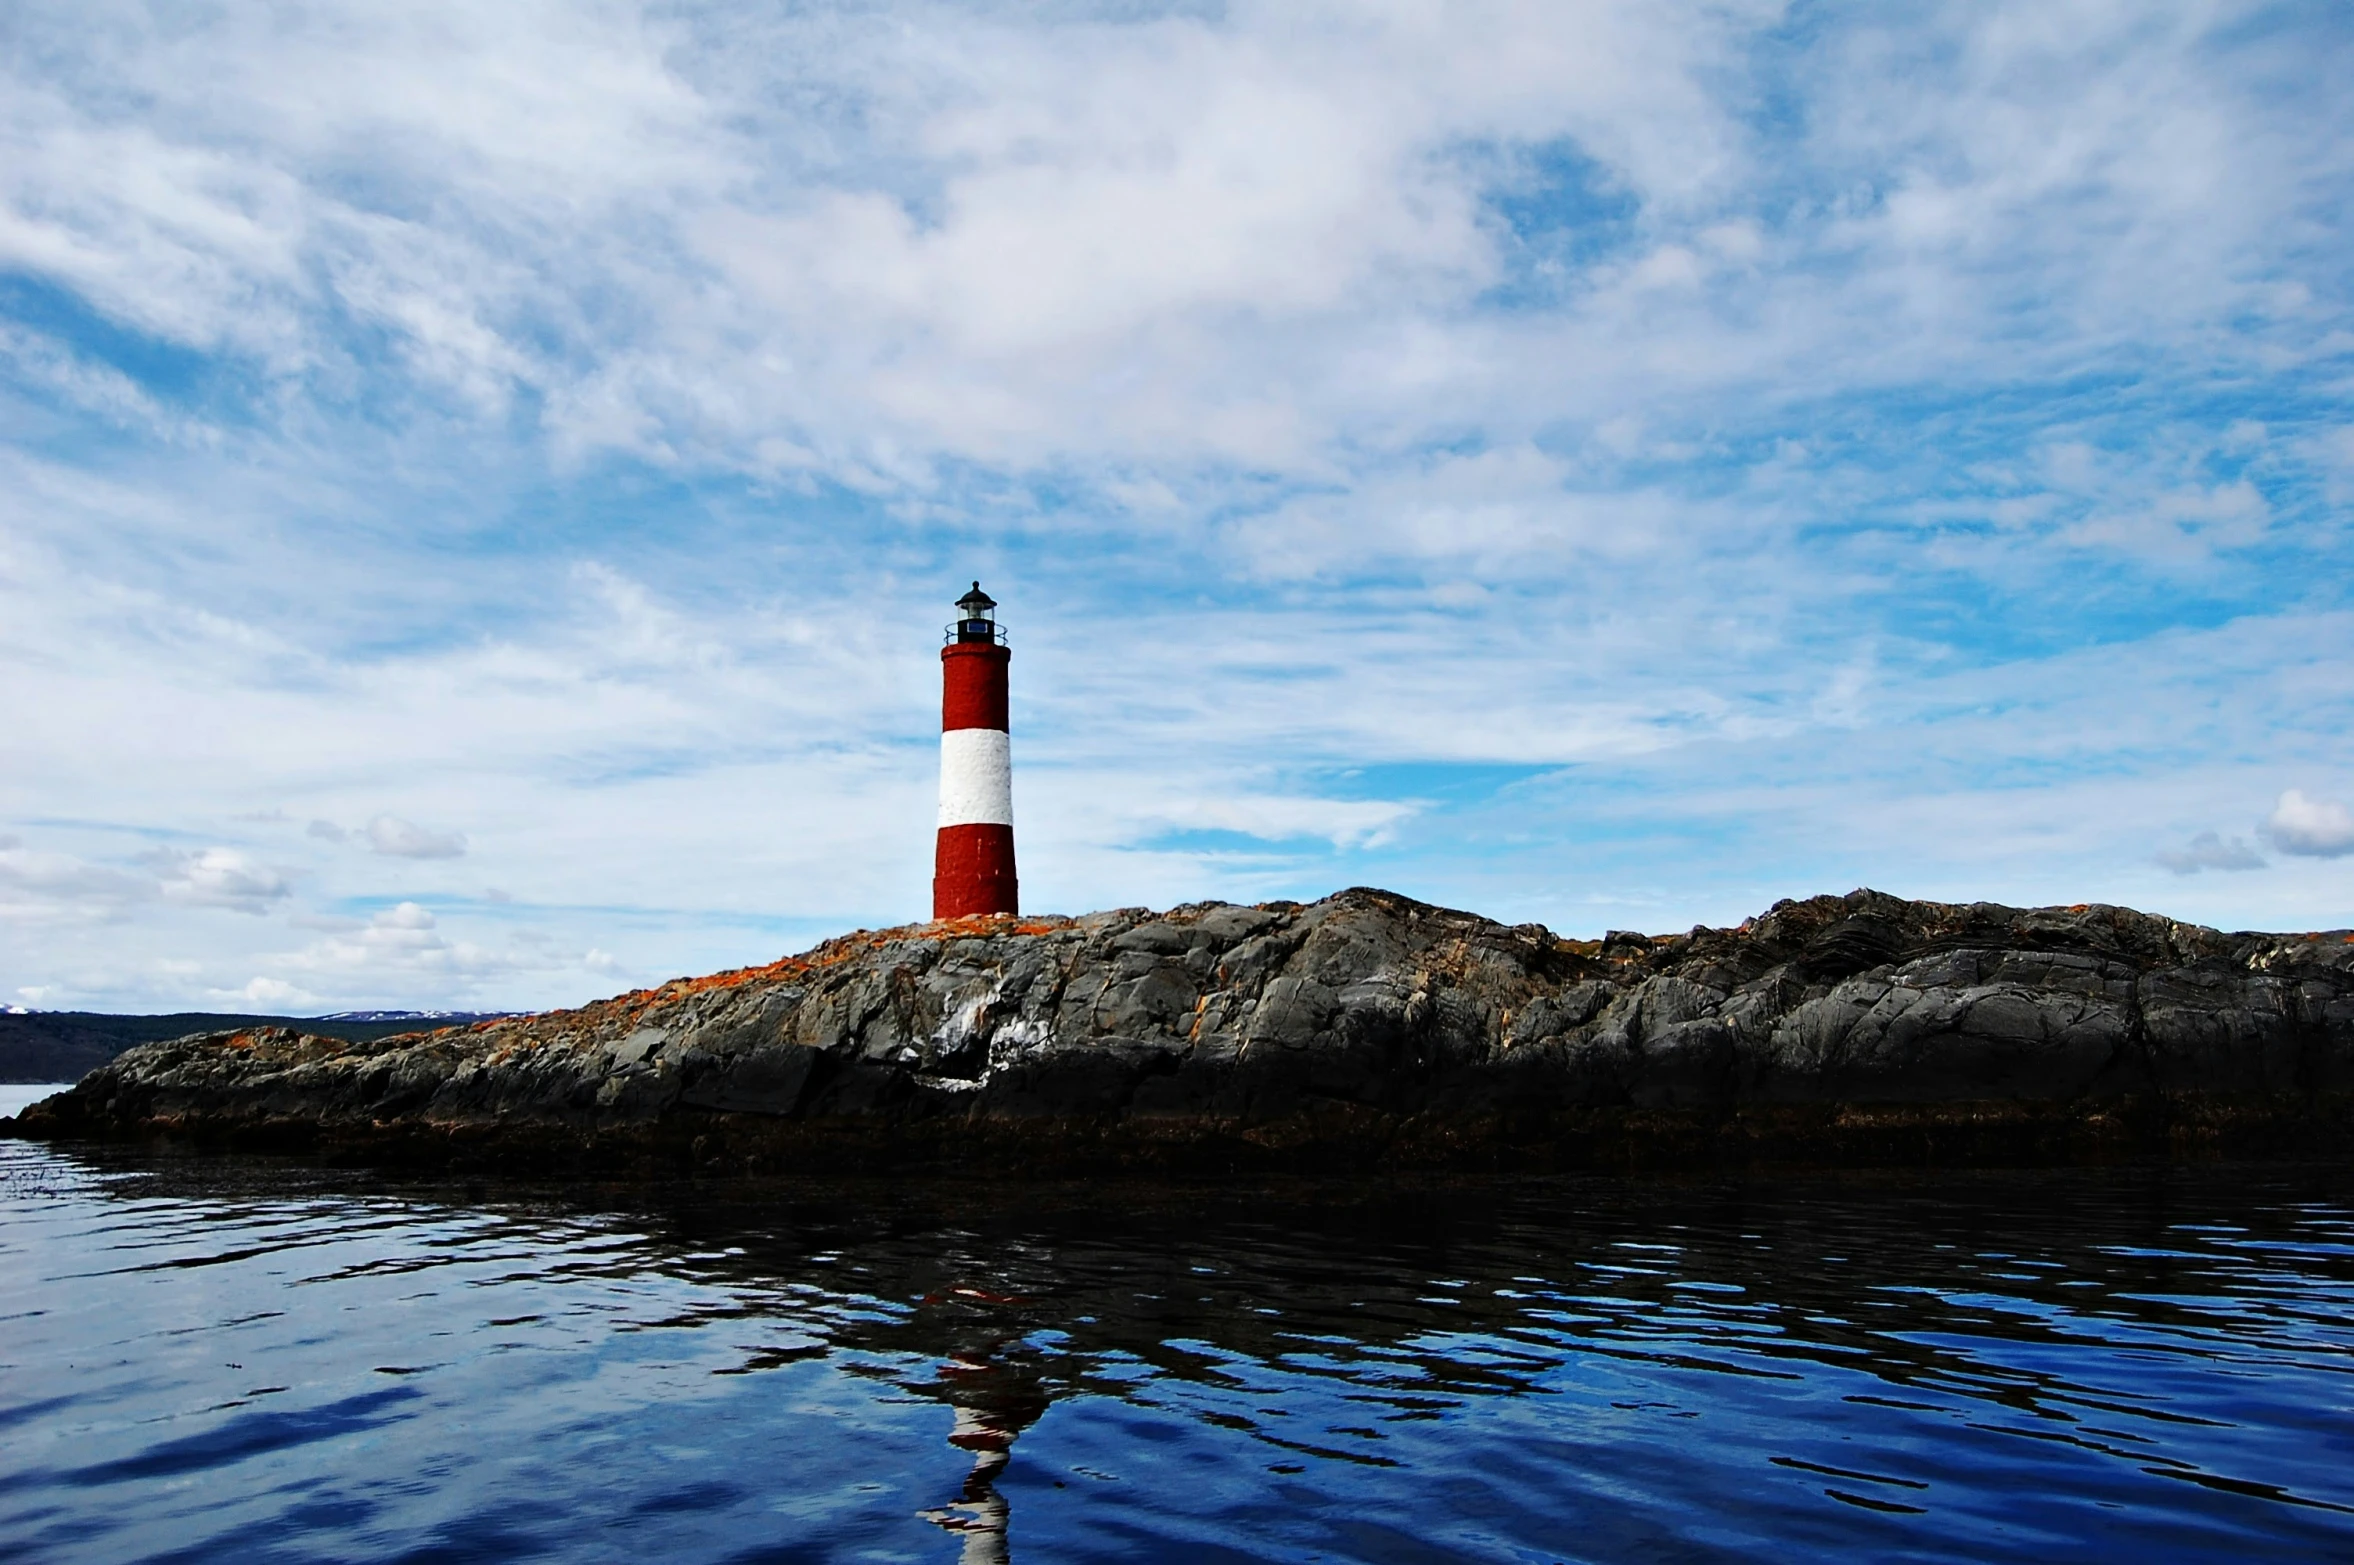 an island with a lighthouse standing in the middle